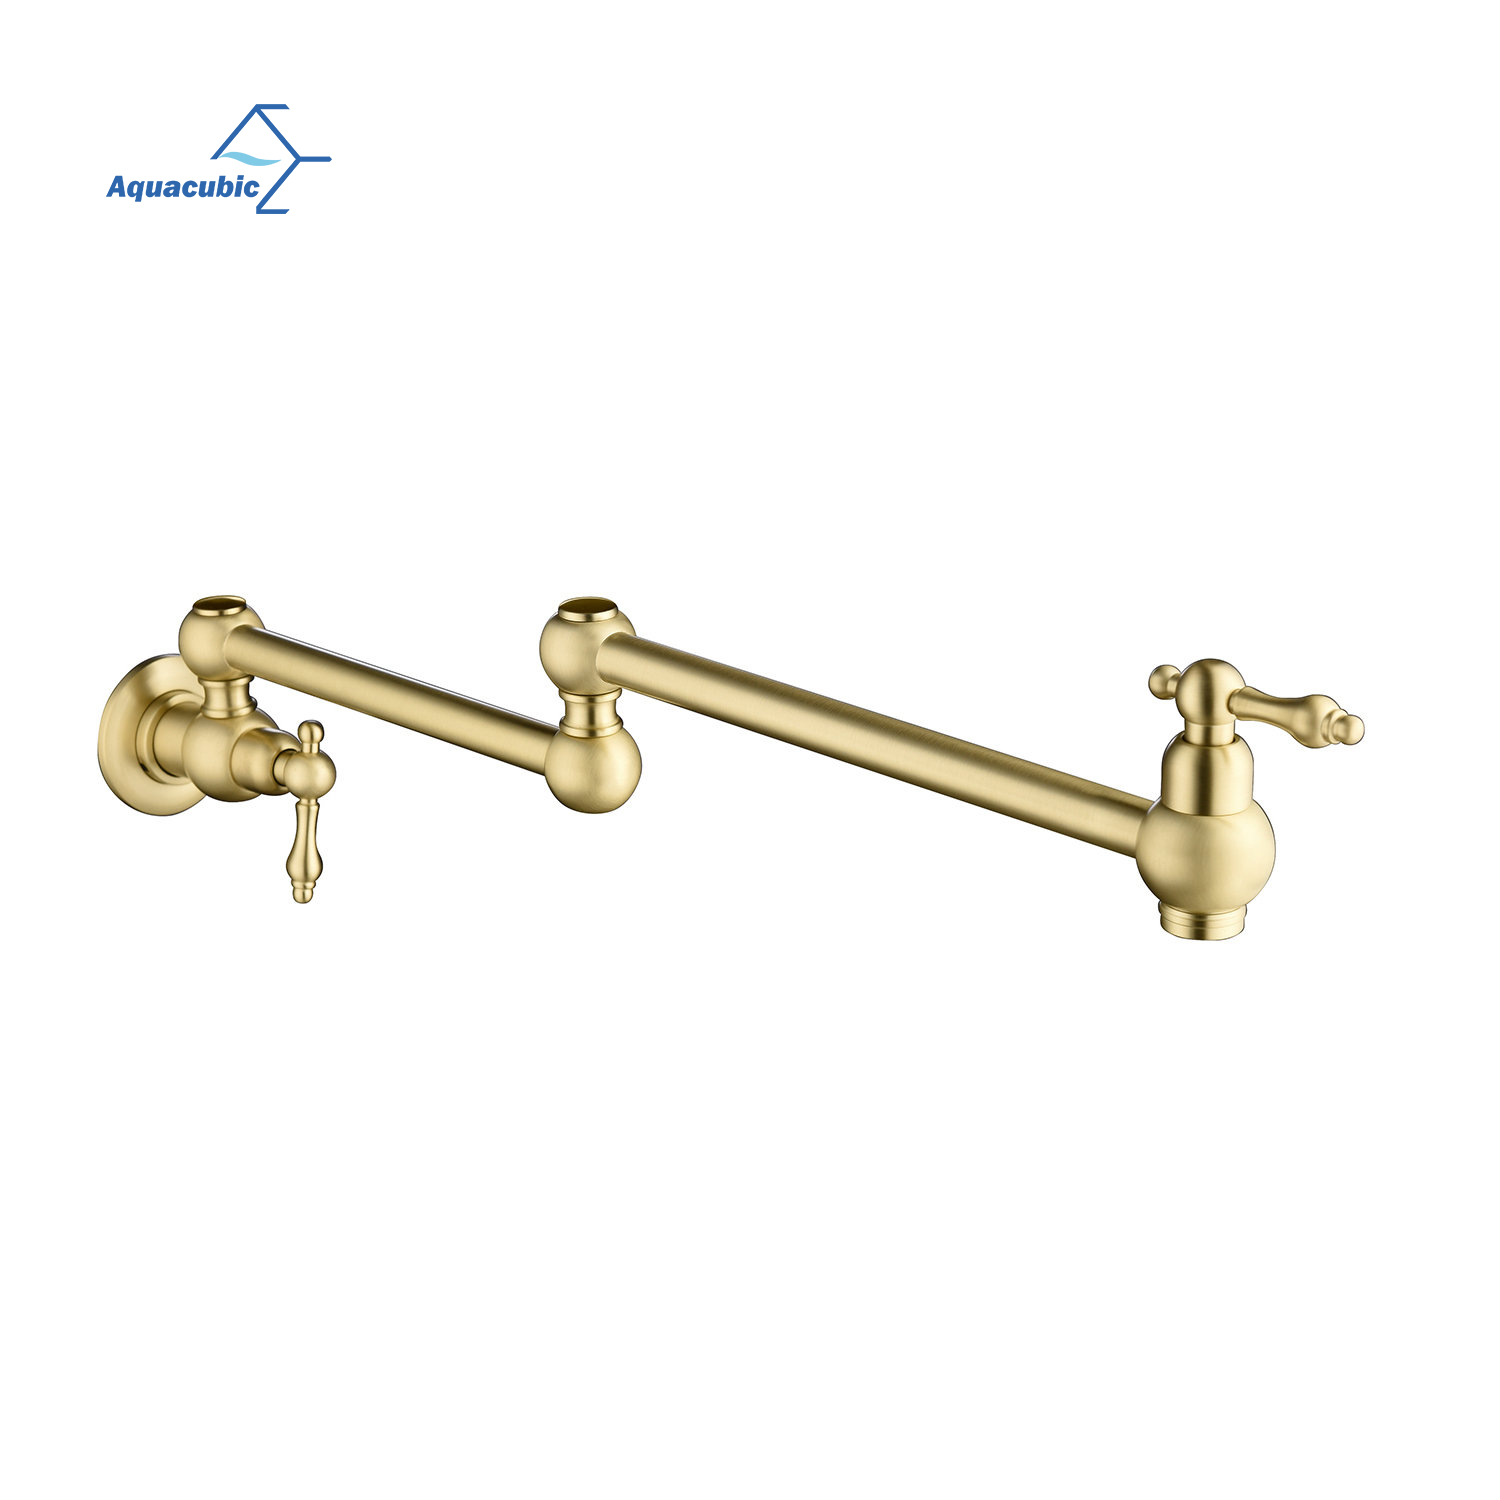 Aquacubic Pot Filler Folding Faucets,Wall Mount Pot Filler Kitchen Faucet Solid Brass,Swing Arm Folding Brushed Gold Modern Kitchen Sink Faucet Folding Stretchable with Single Hole Two Handle